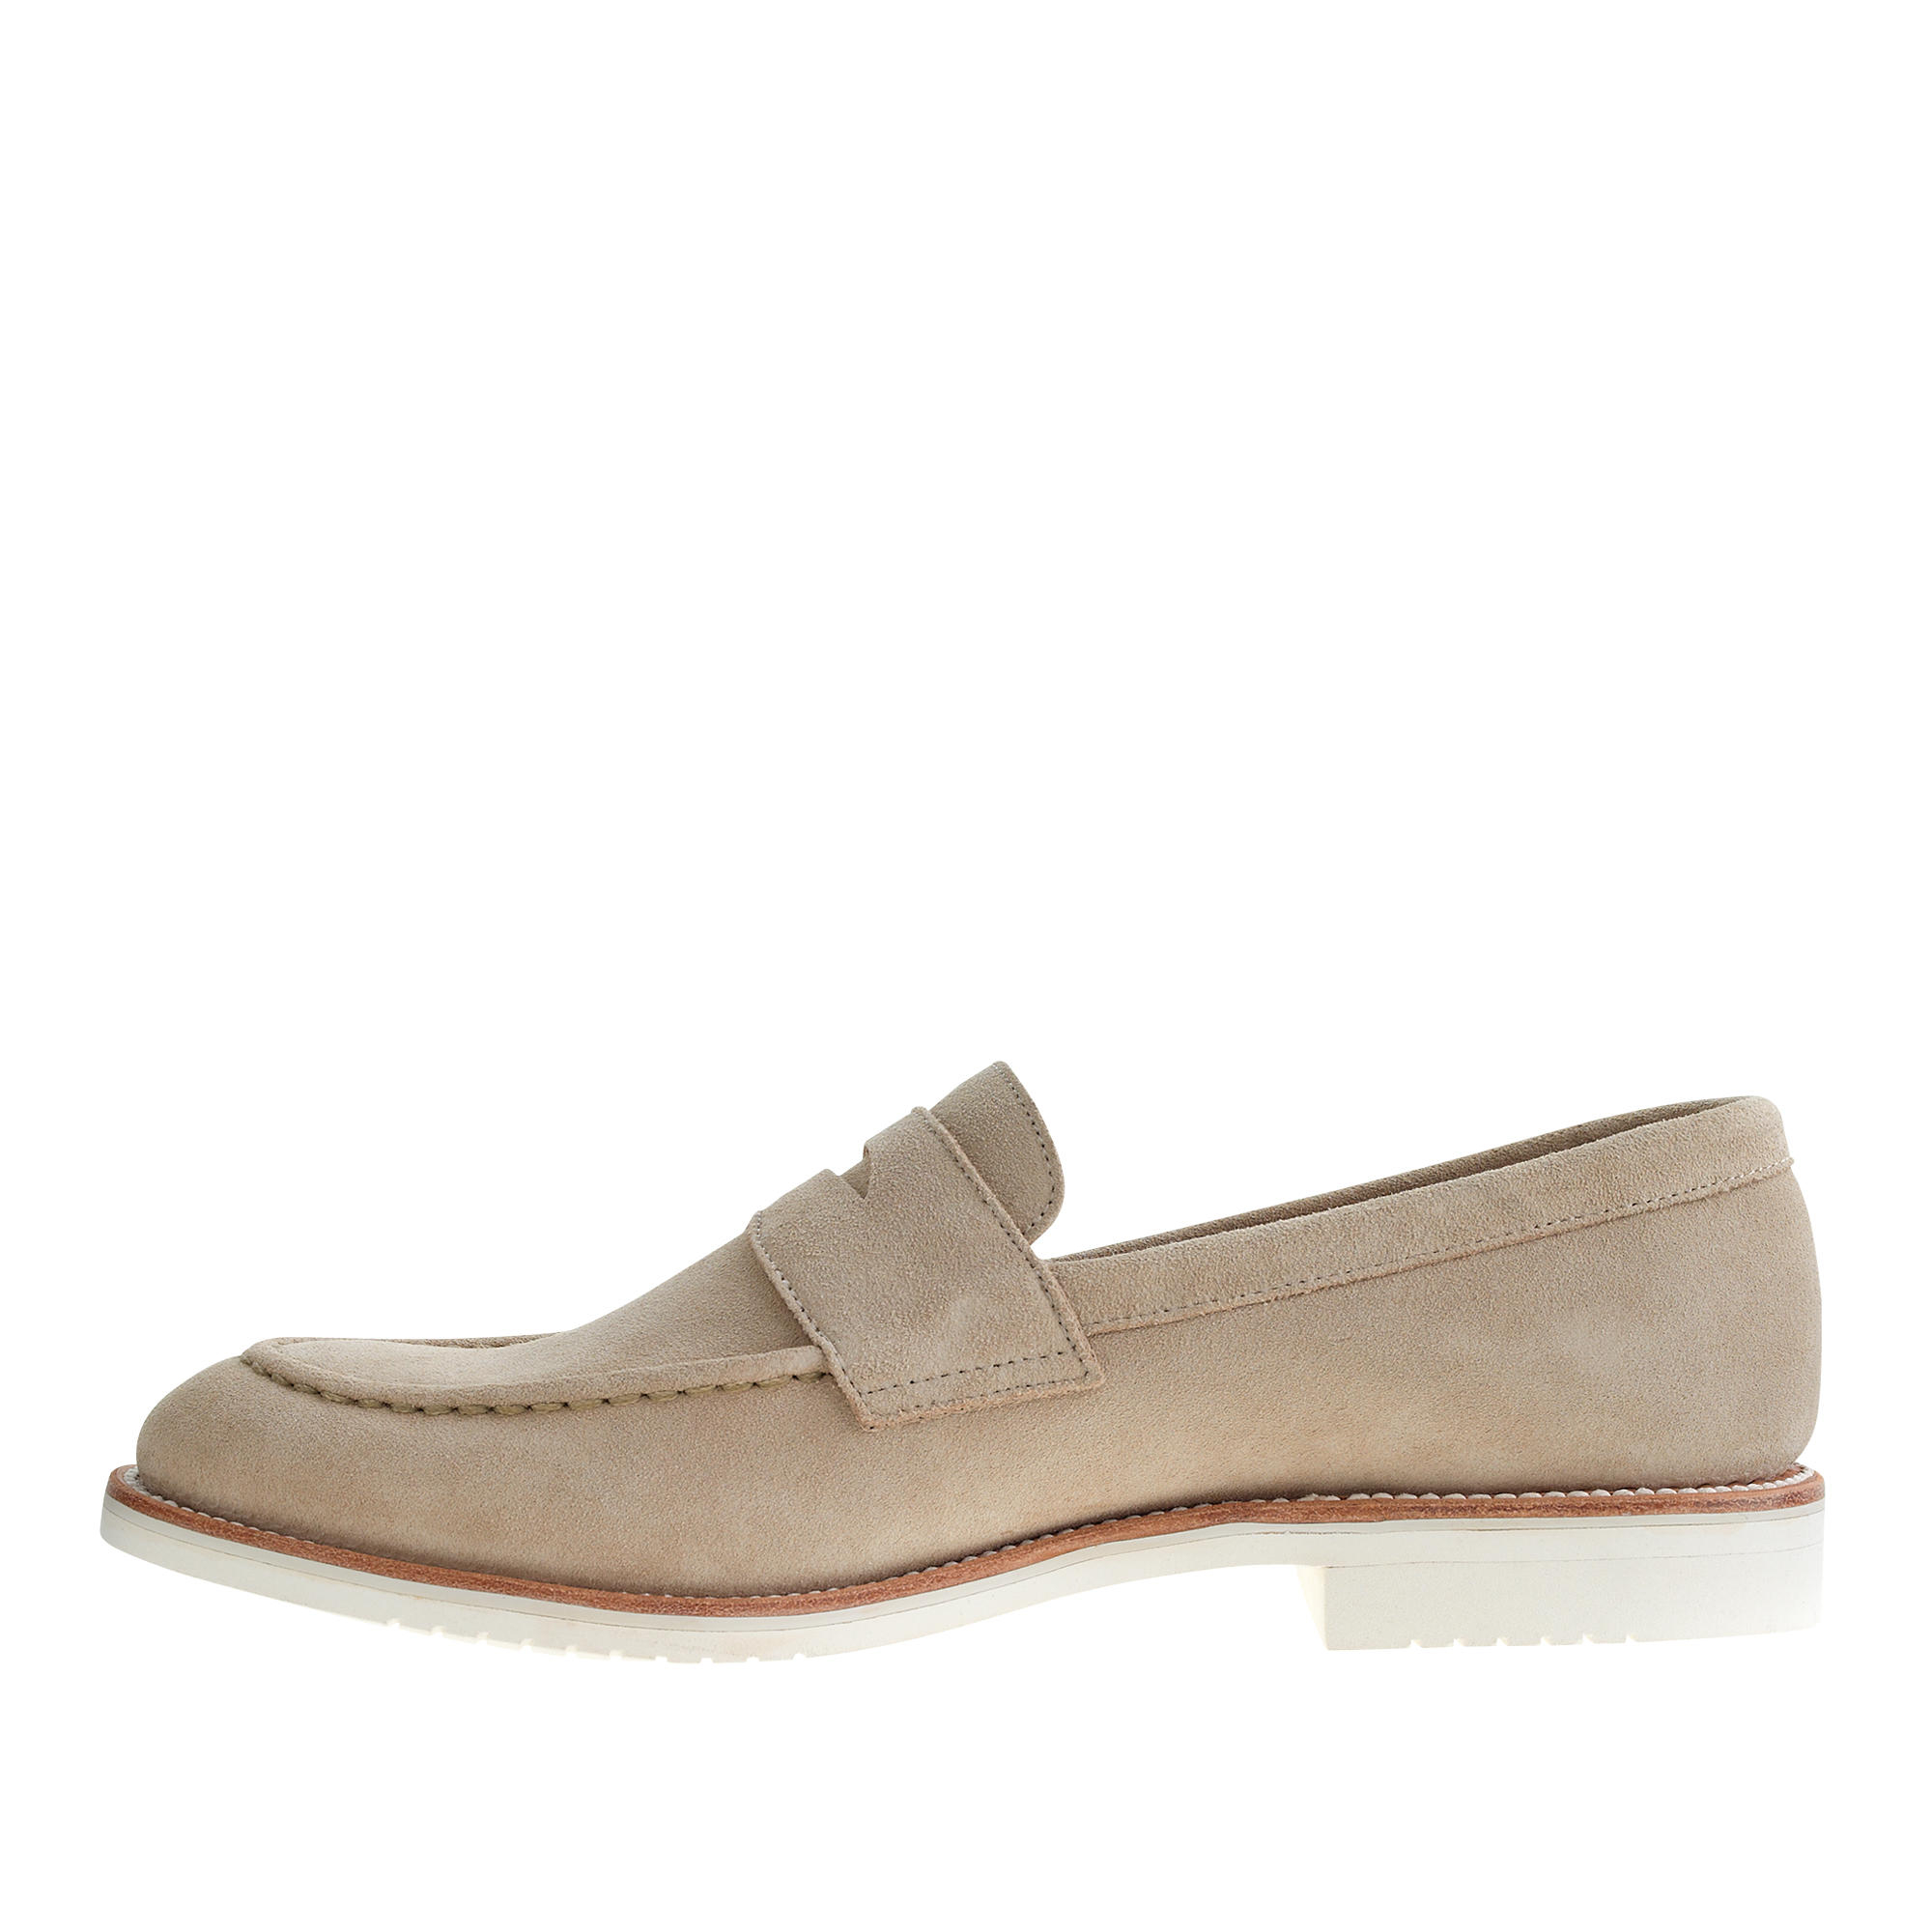 Lyst - J.Crew Kenton Suede Penny Loafers With White Soles in Natural ...